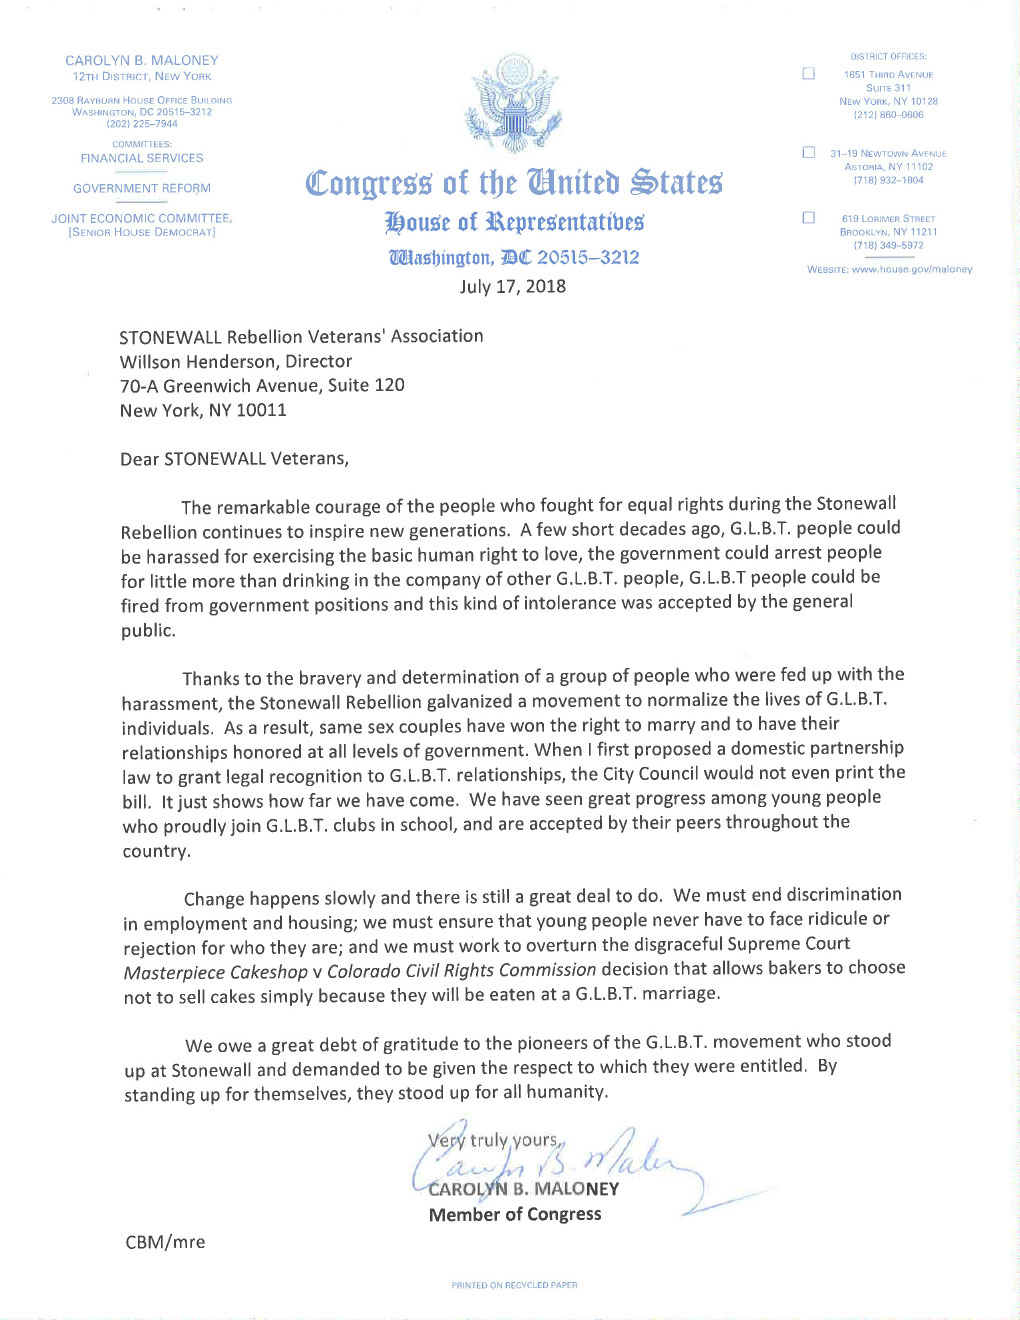 Congresswoman Maloney's Annual Letter of Applause to the STONEWALL Veterans - 2018